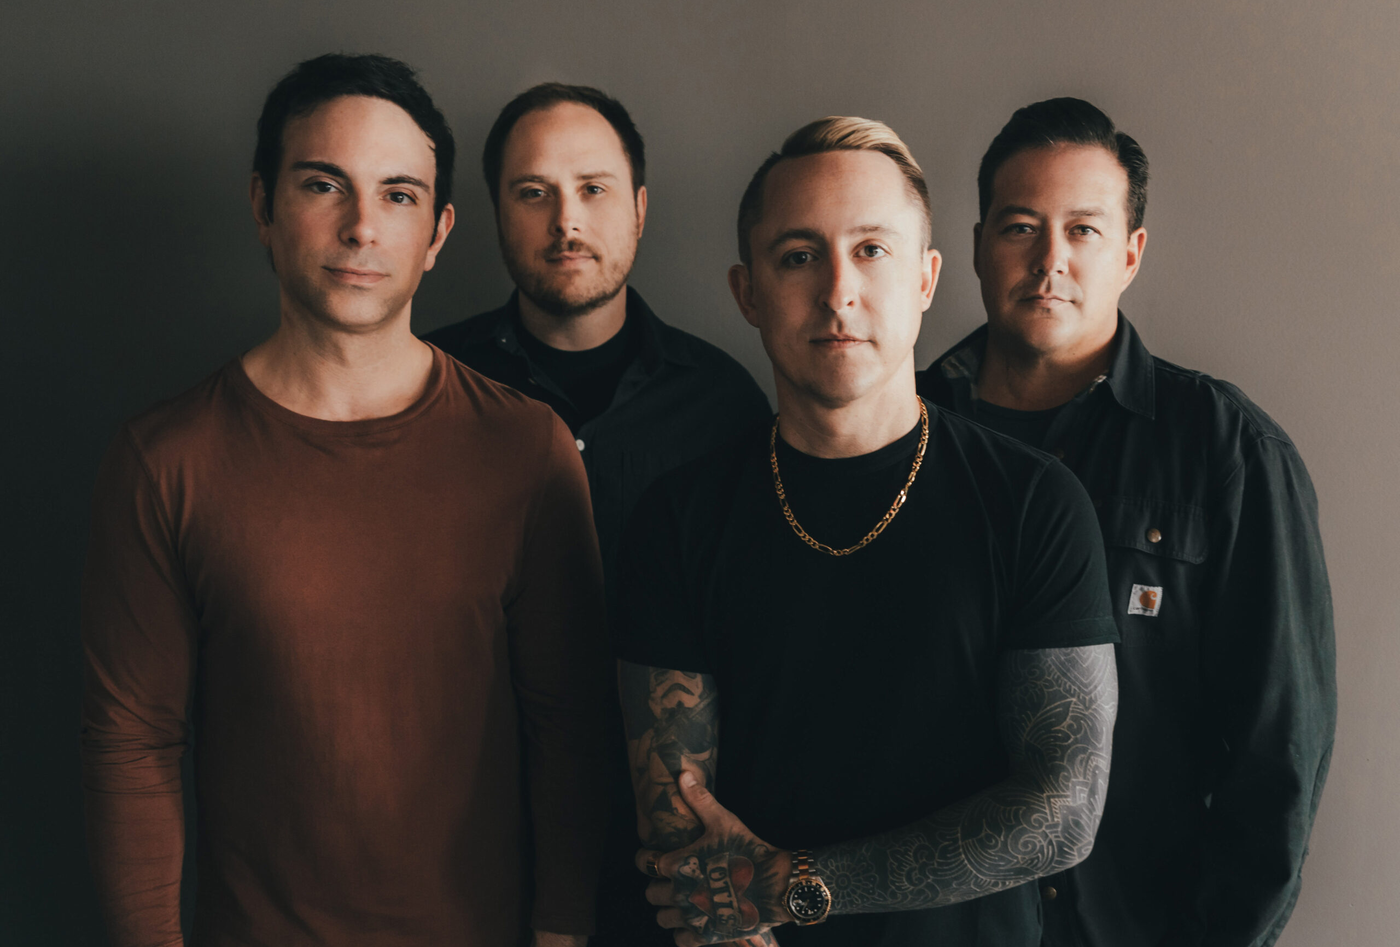 YELLOWCARD SIGN TO EVR, ANNOUNCE NEW EP, ‘CHILDHOOD EYES’